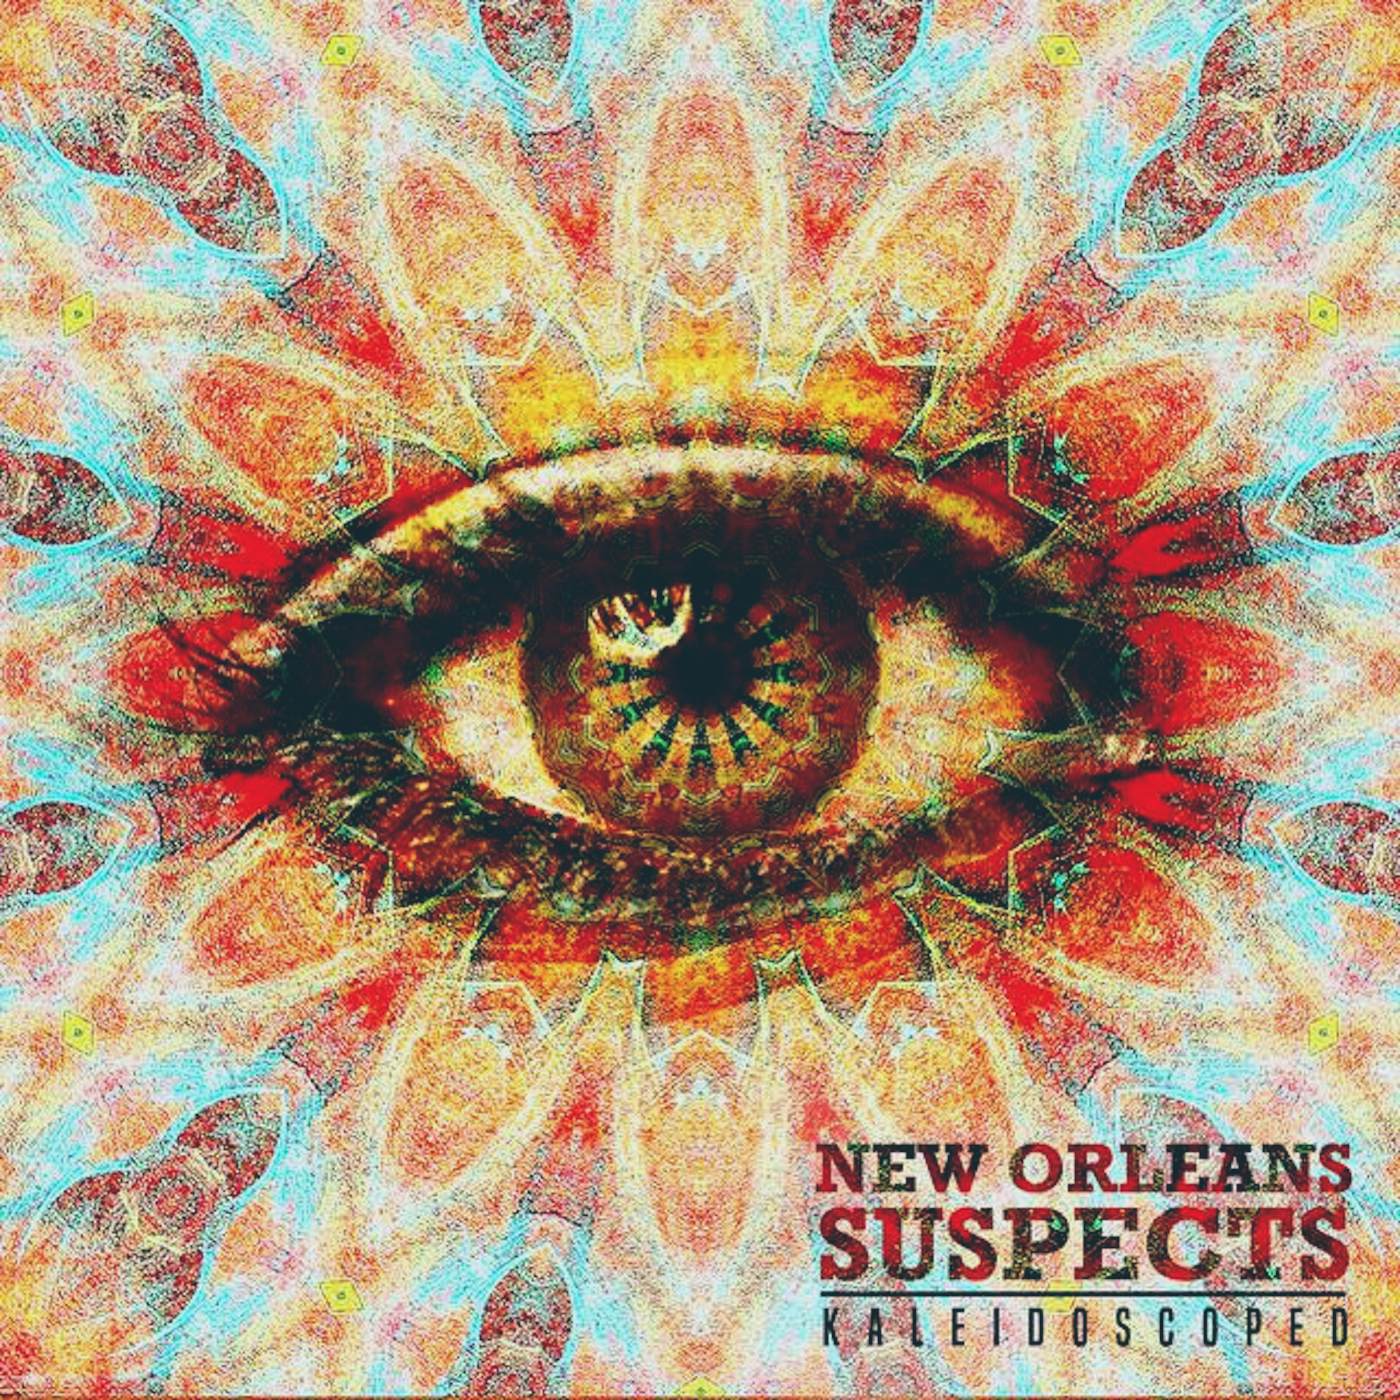 The New Orleans Suspects